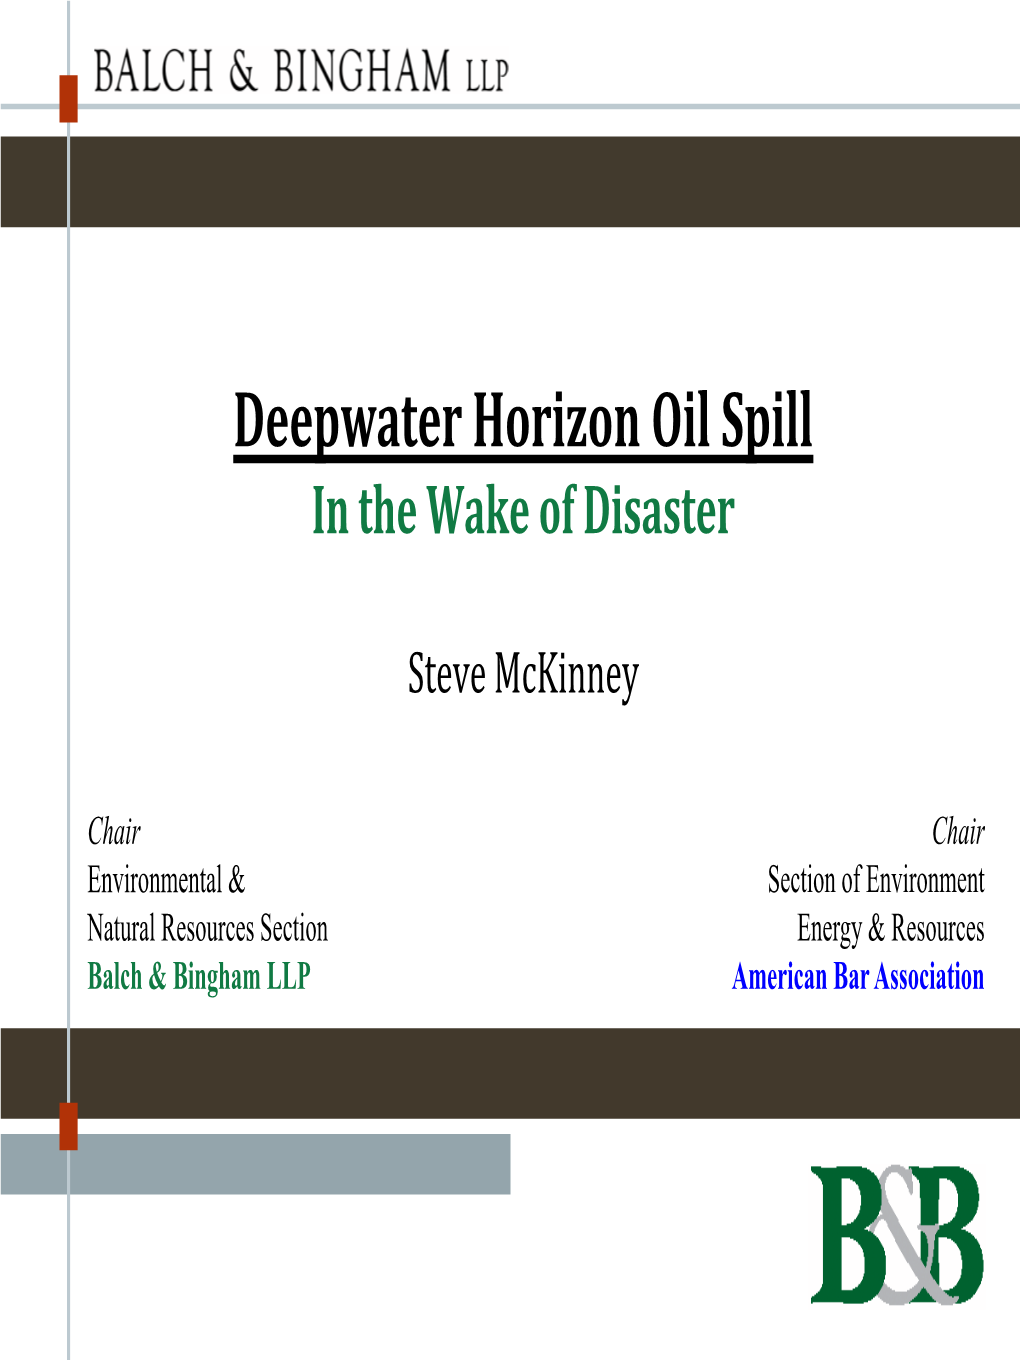 Deepwater Horizon Oil Spill in the Wake of Disaster